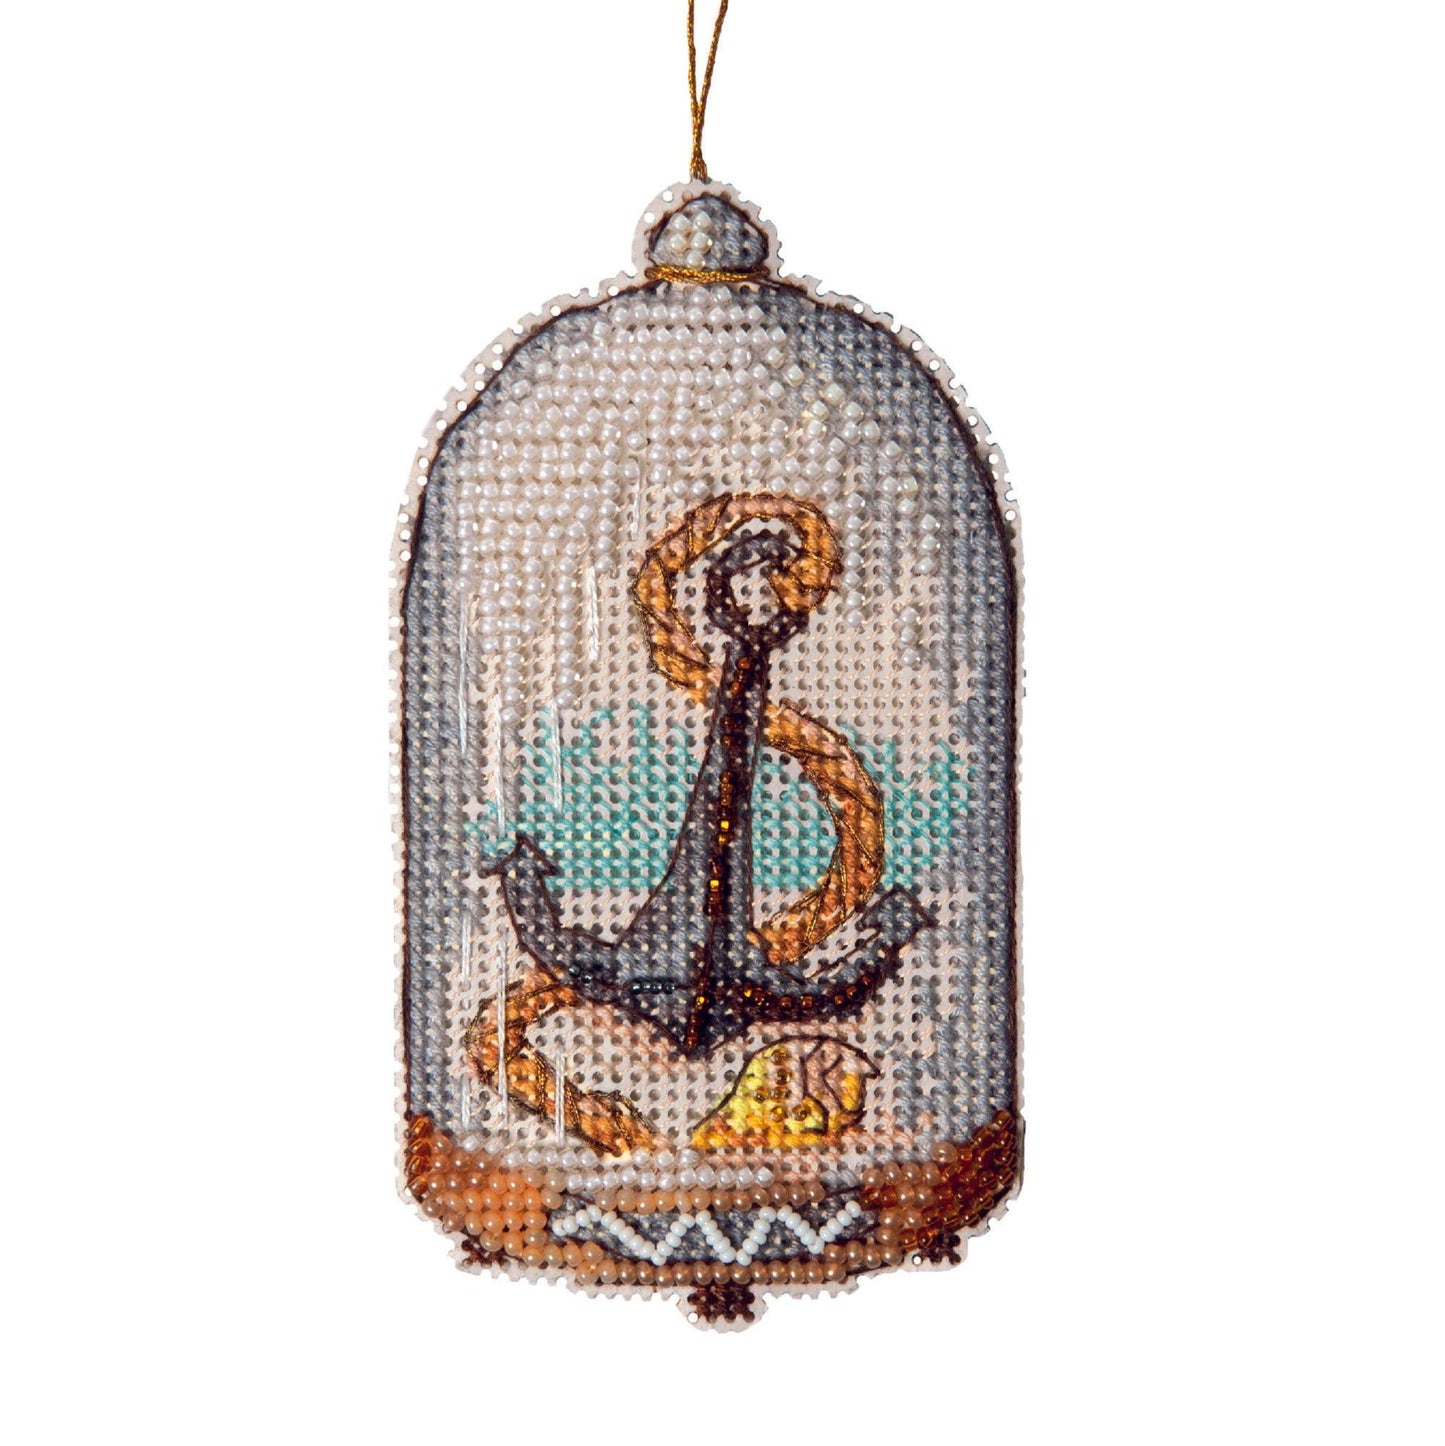 ANCHOR "In search of treasures series", Counted Cross Stitch Kit, 14 count plastic canvas, size 6,5 x 11 cm, CRYSTAL ART (T-88)